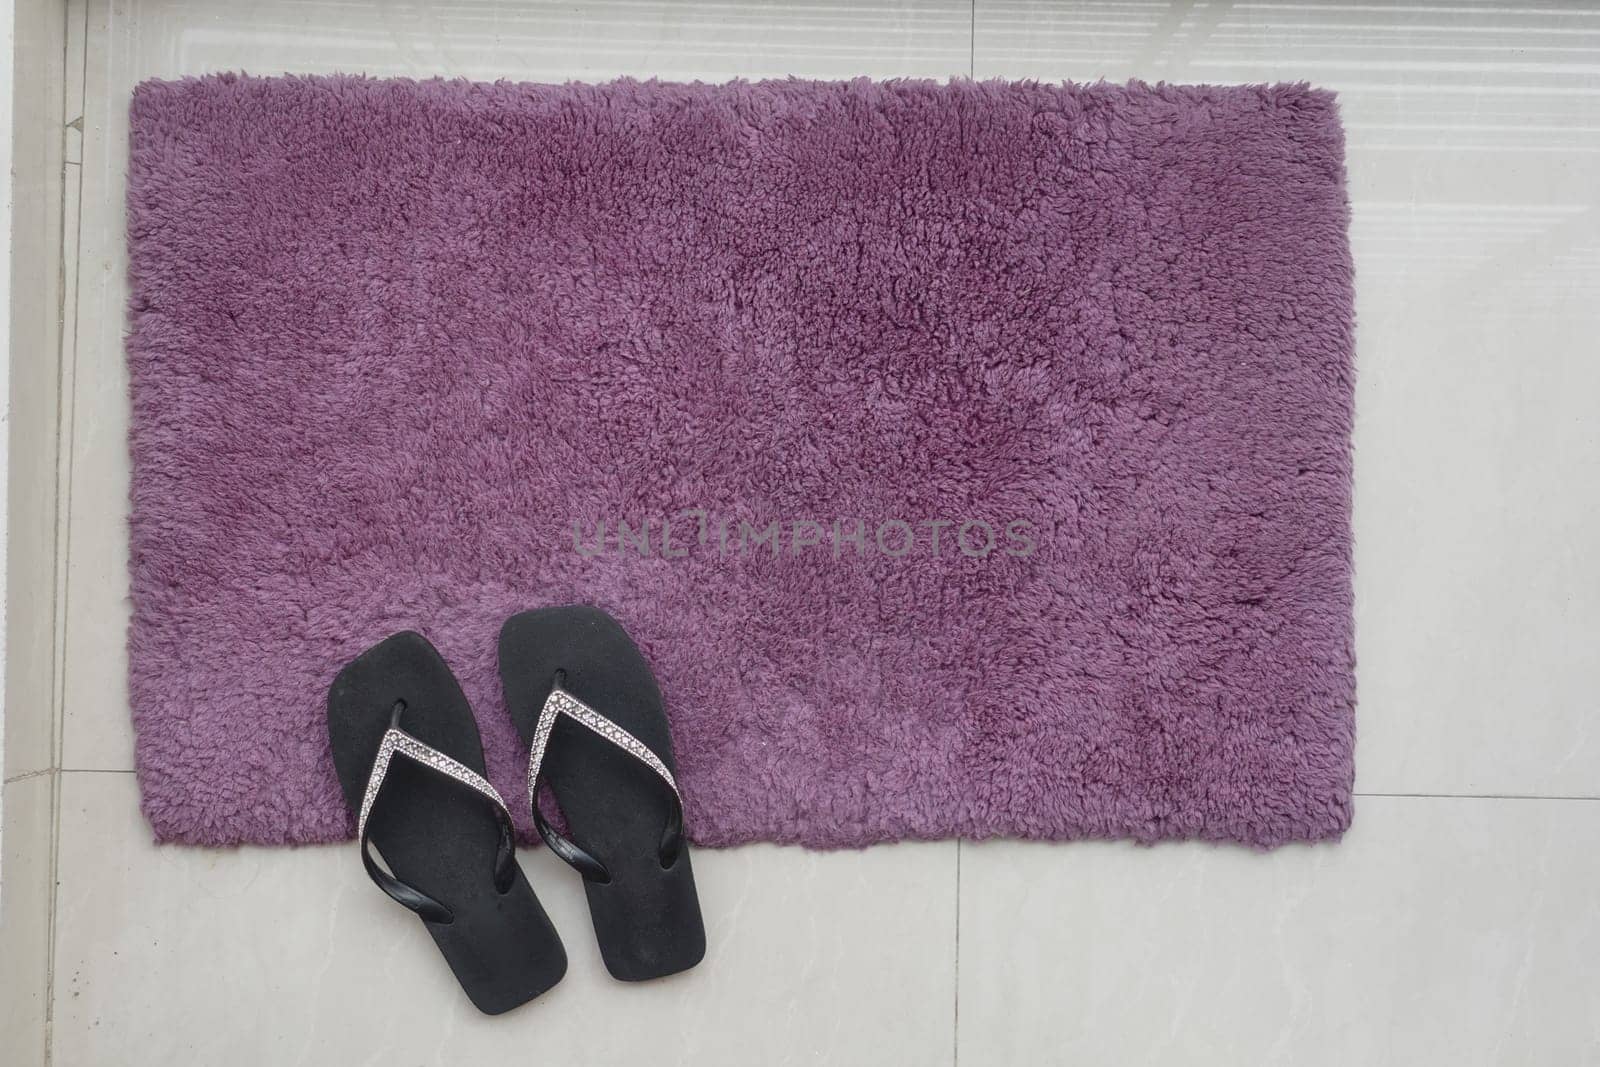 Pair of shoes on a rectangle rug in shades of purple by towfiq007